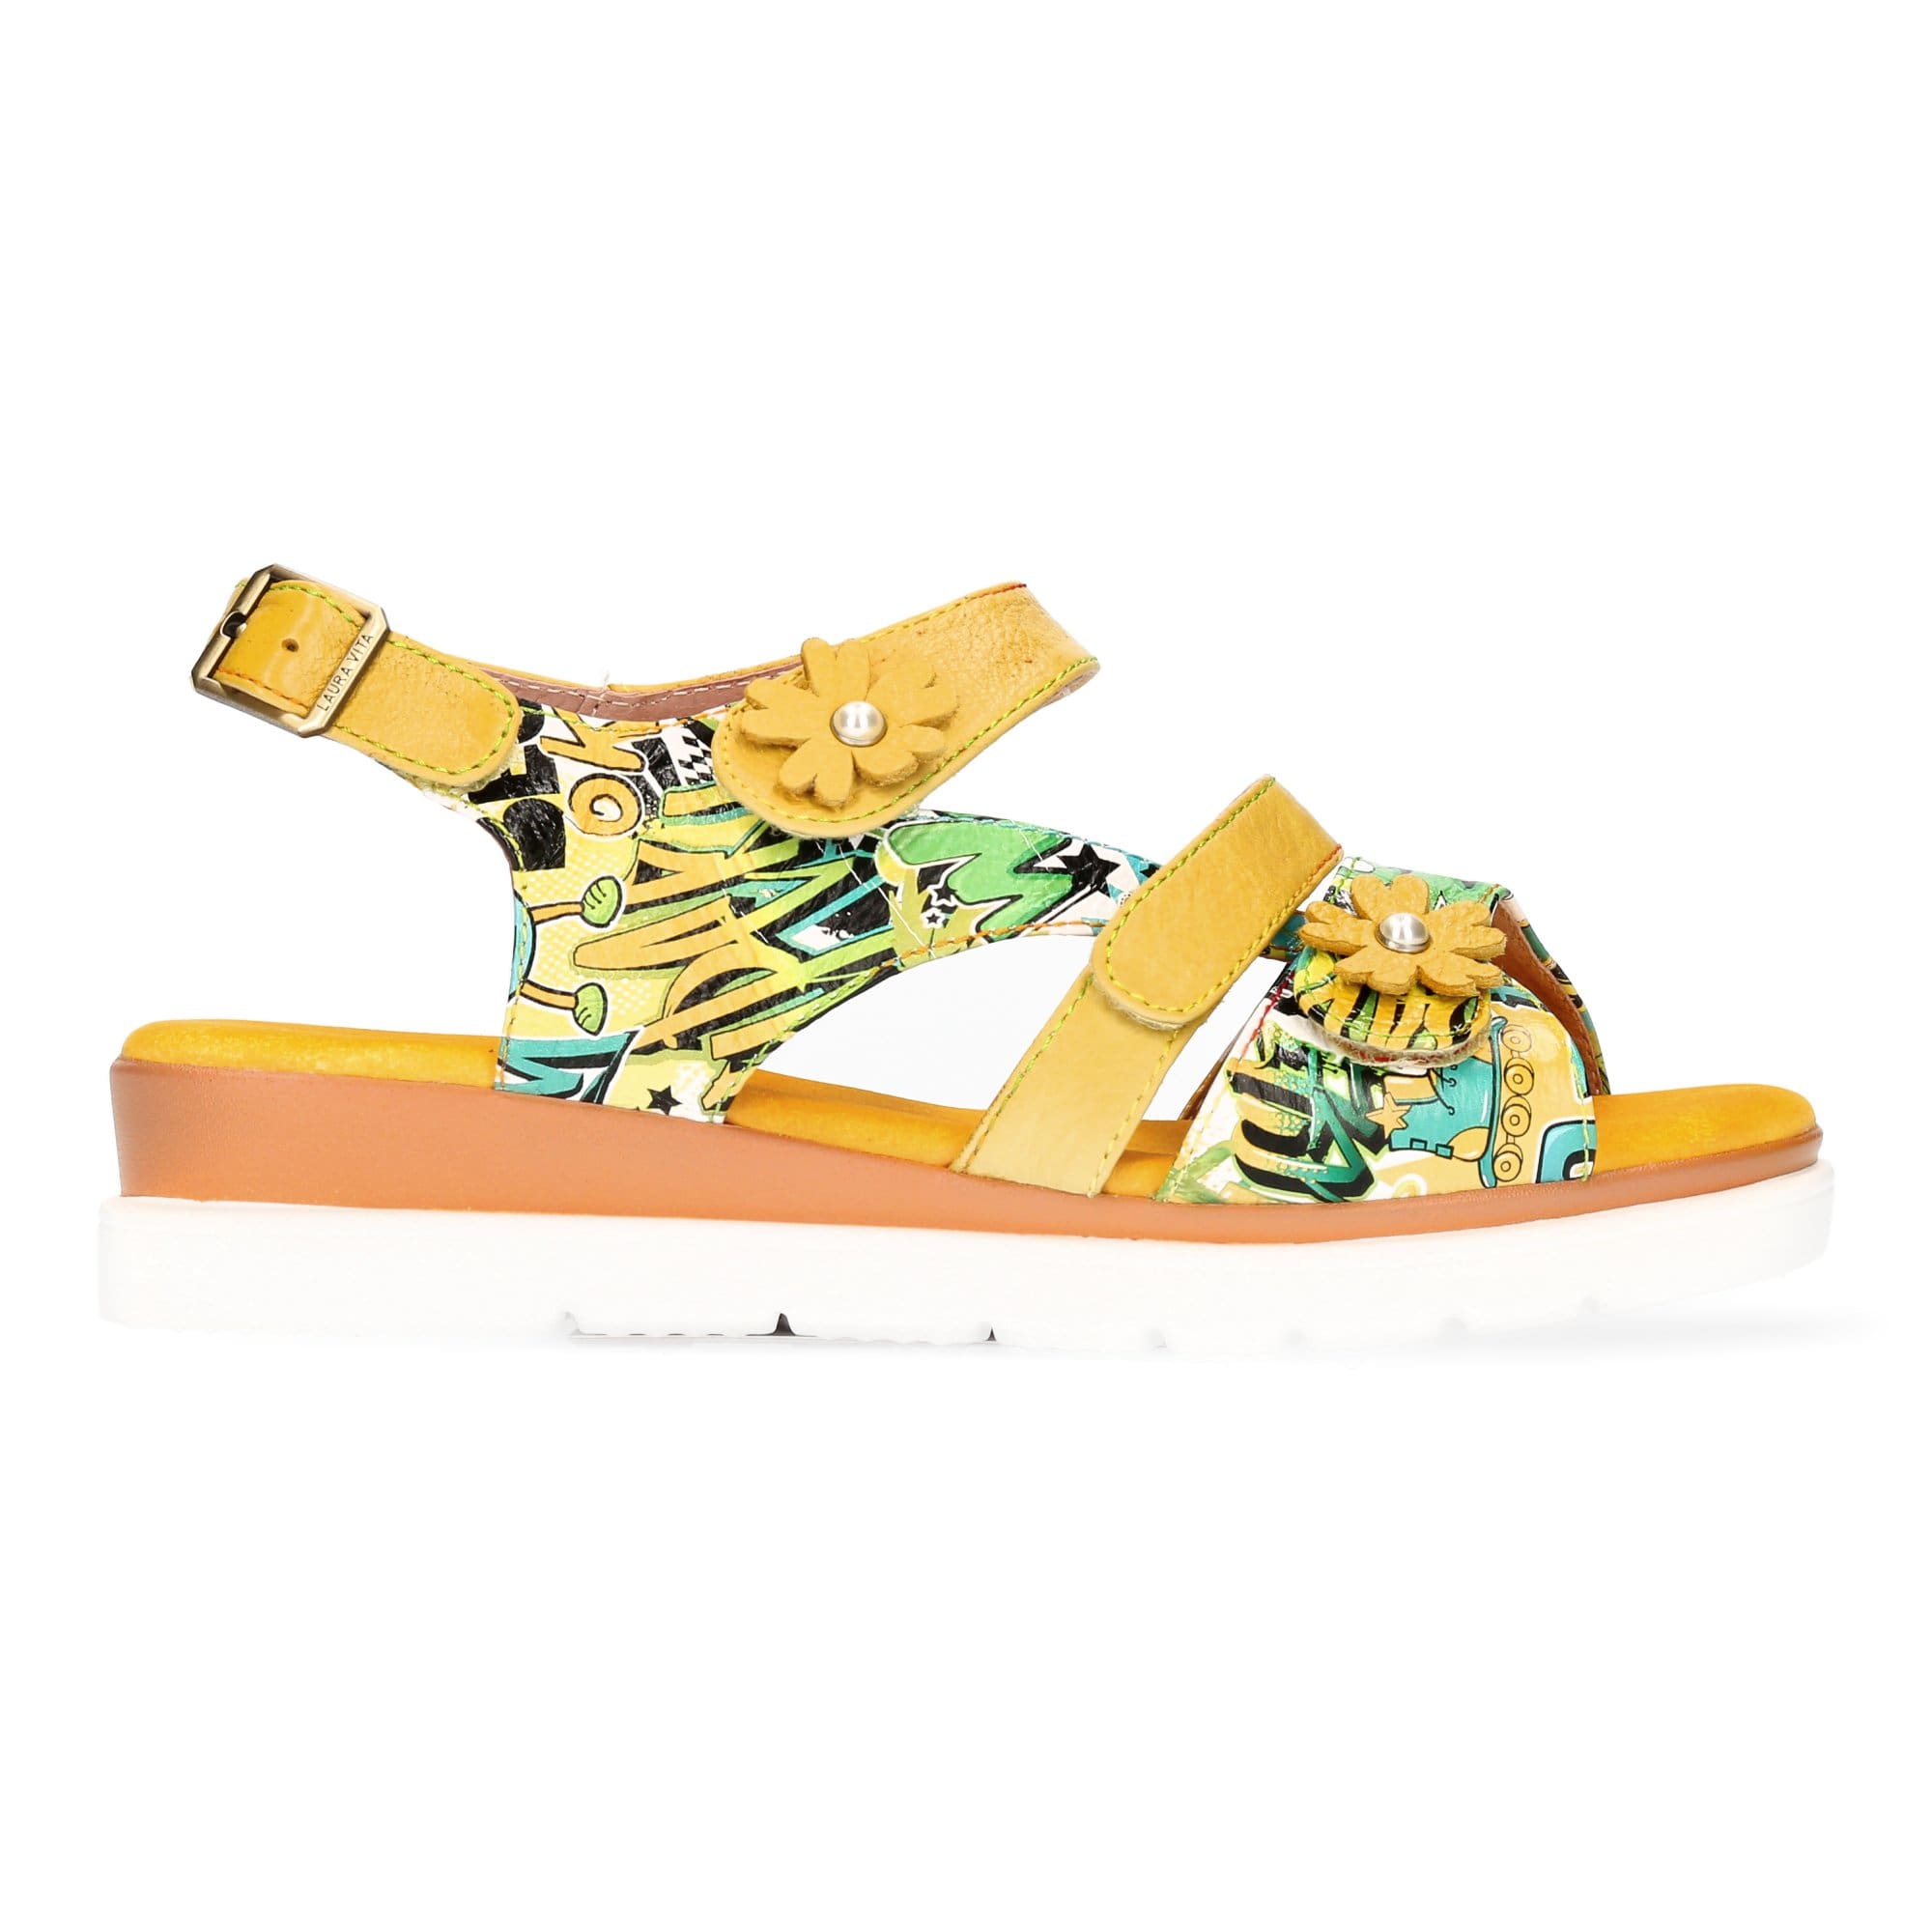 Shoes JACCEEO 05 - 35 / Yellow - Sandal